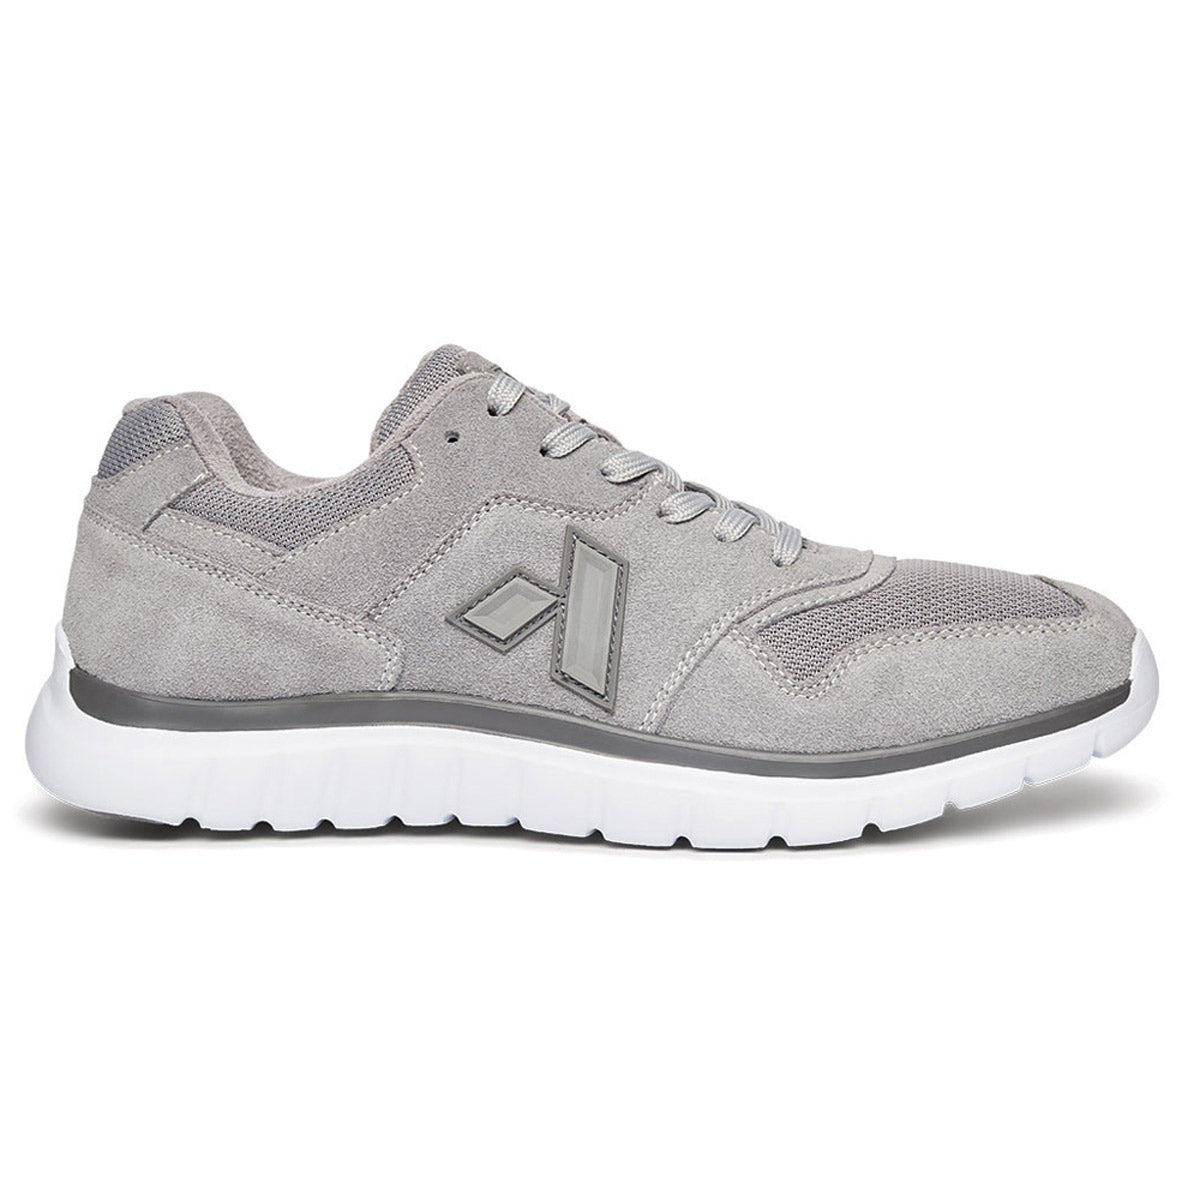 A single ANODYNE sport trainer grey with a white sole and a visible logo on the side.